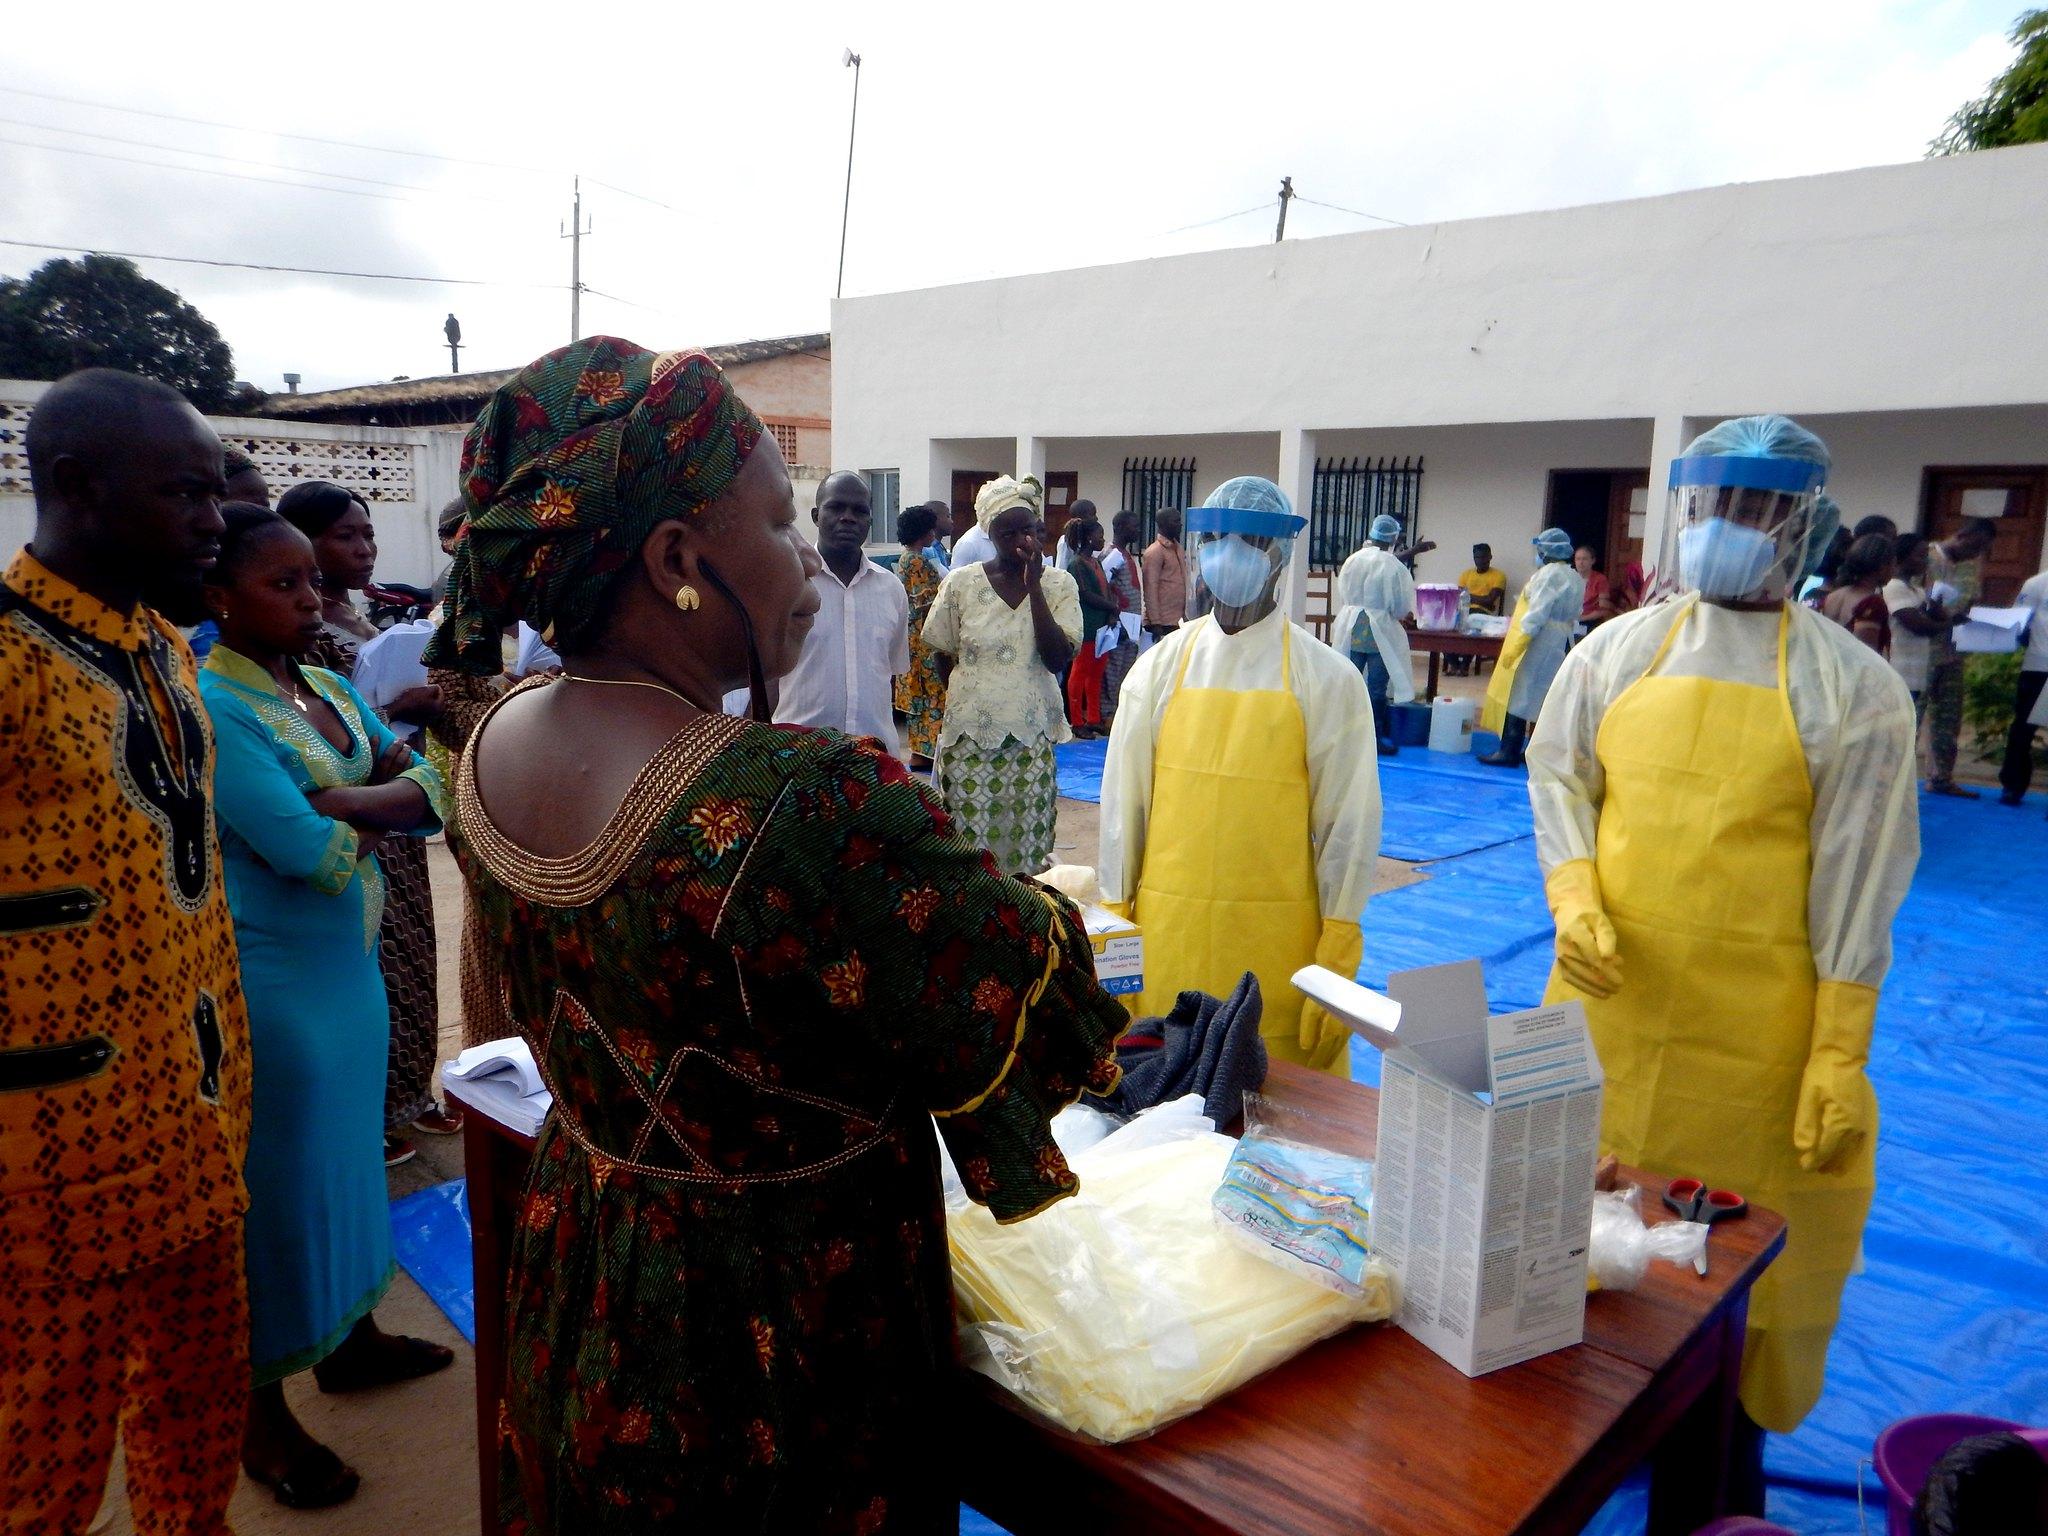 Guinea’s frontline healthcare workers receive practical training in identifying, isolating, and caring for Ebola patients.